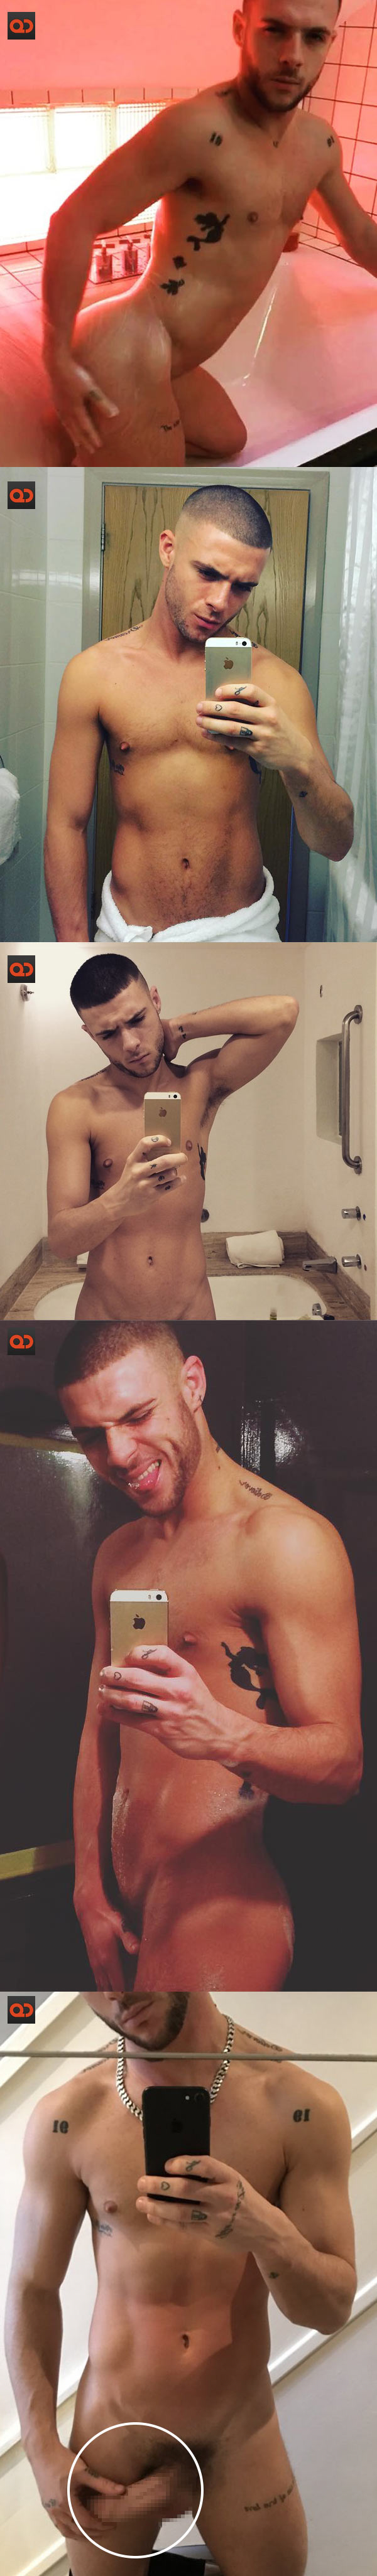 Aaron Frew, From Big Brother UK, Naked Selfies And Dick Pics Surface Online!